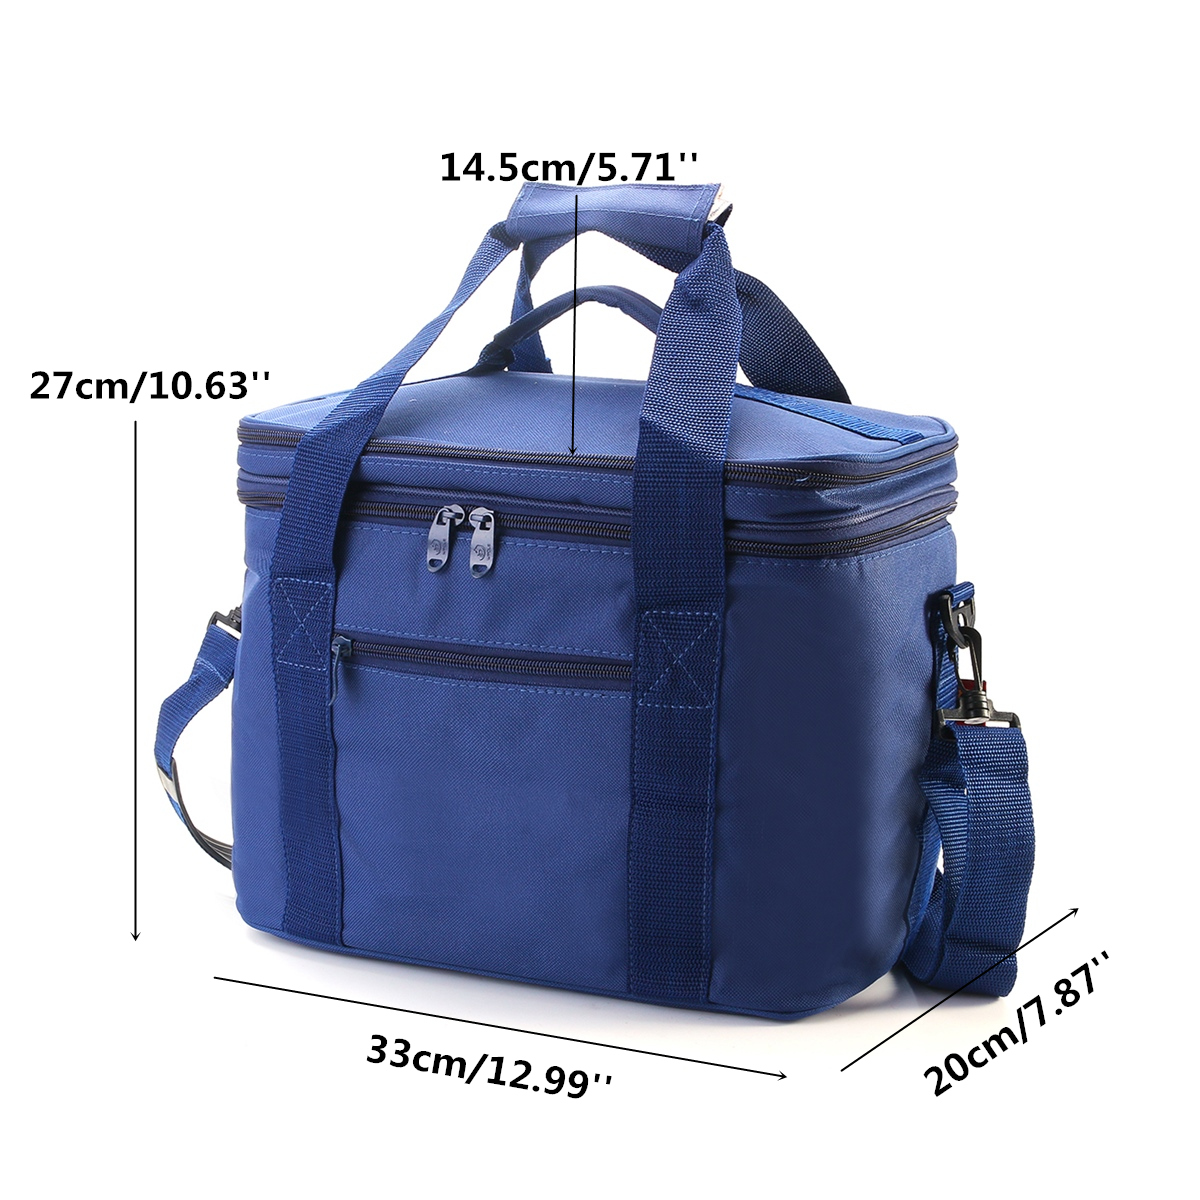 33x20x27cm-Oxford-Double-layer-Insulated-Lunch-Bag-Large-Capacity-Travel-Outdoor-Picnic-Tote-Bag-1199100-2